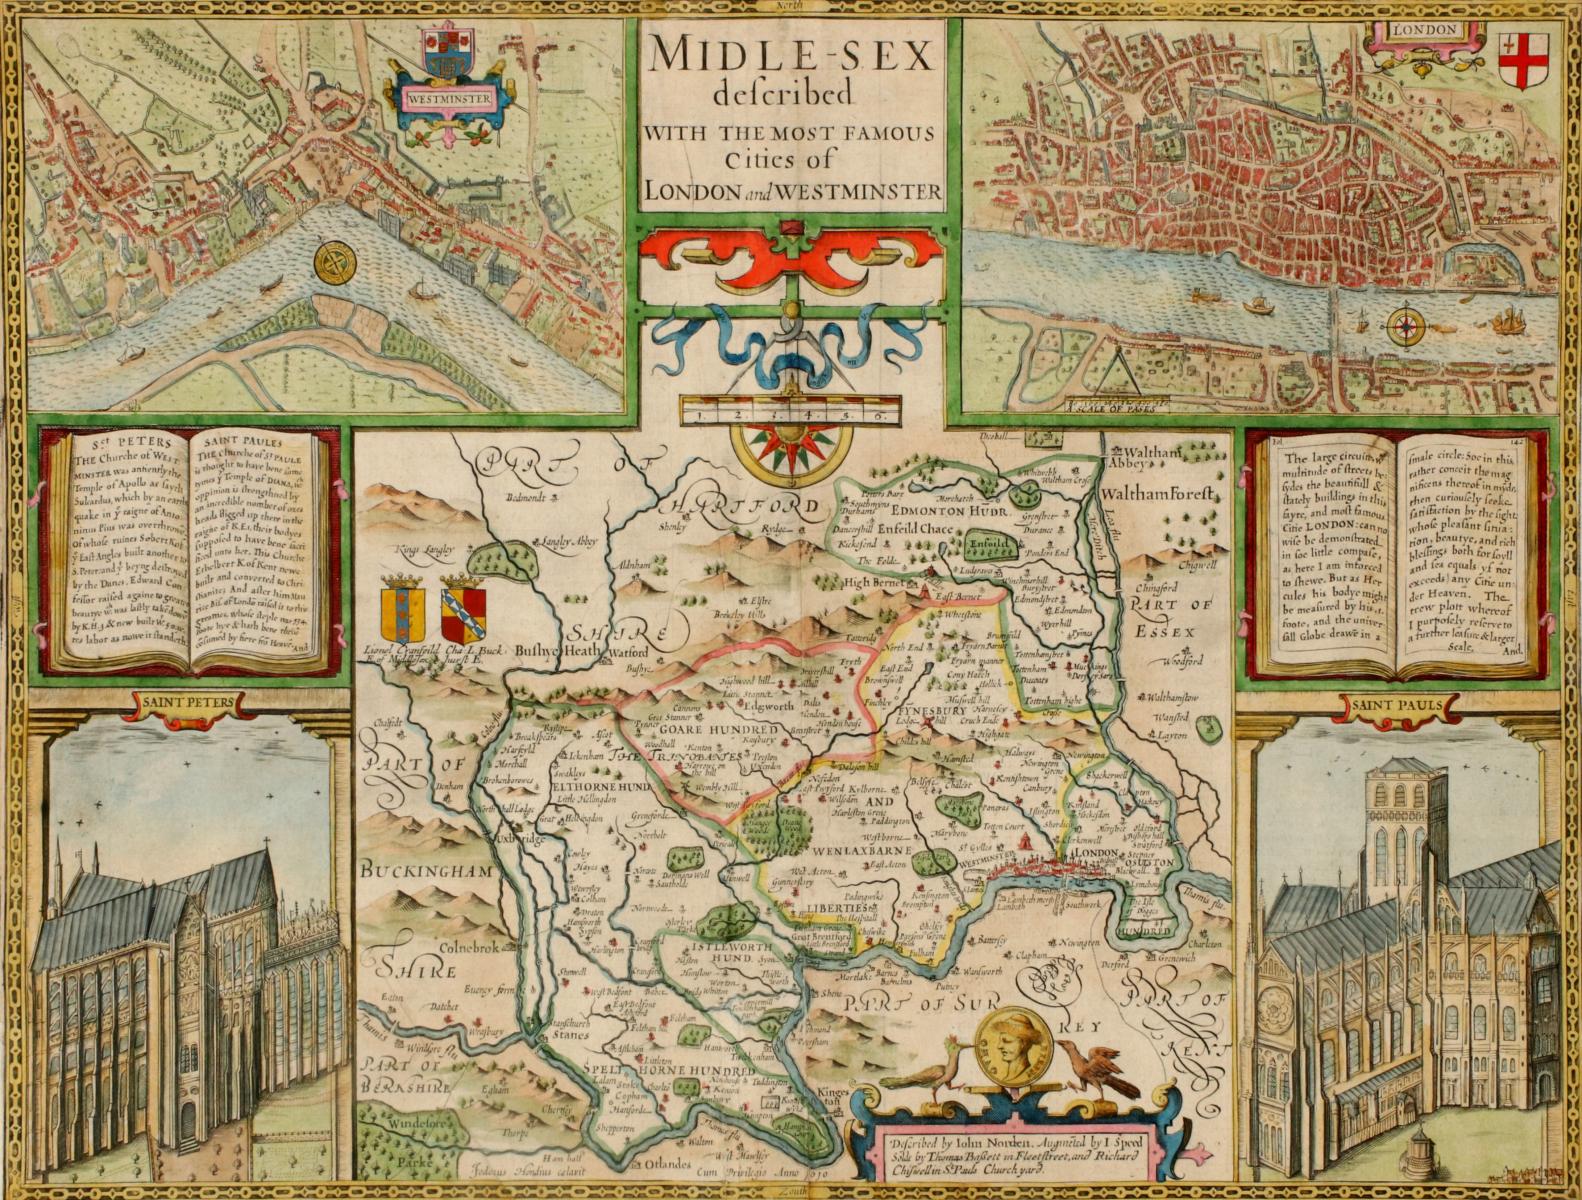 SPEED'S MAP OF 'MIDLE-SEX', LONDON, CIRCA 17TH C.